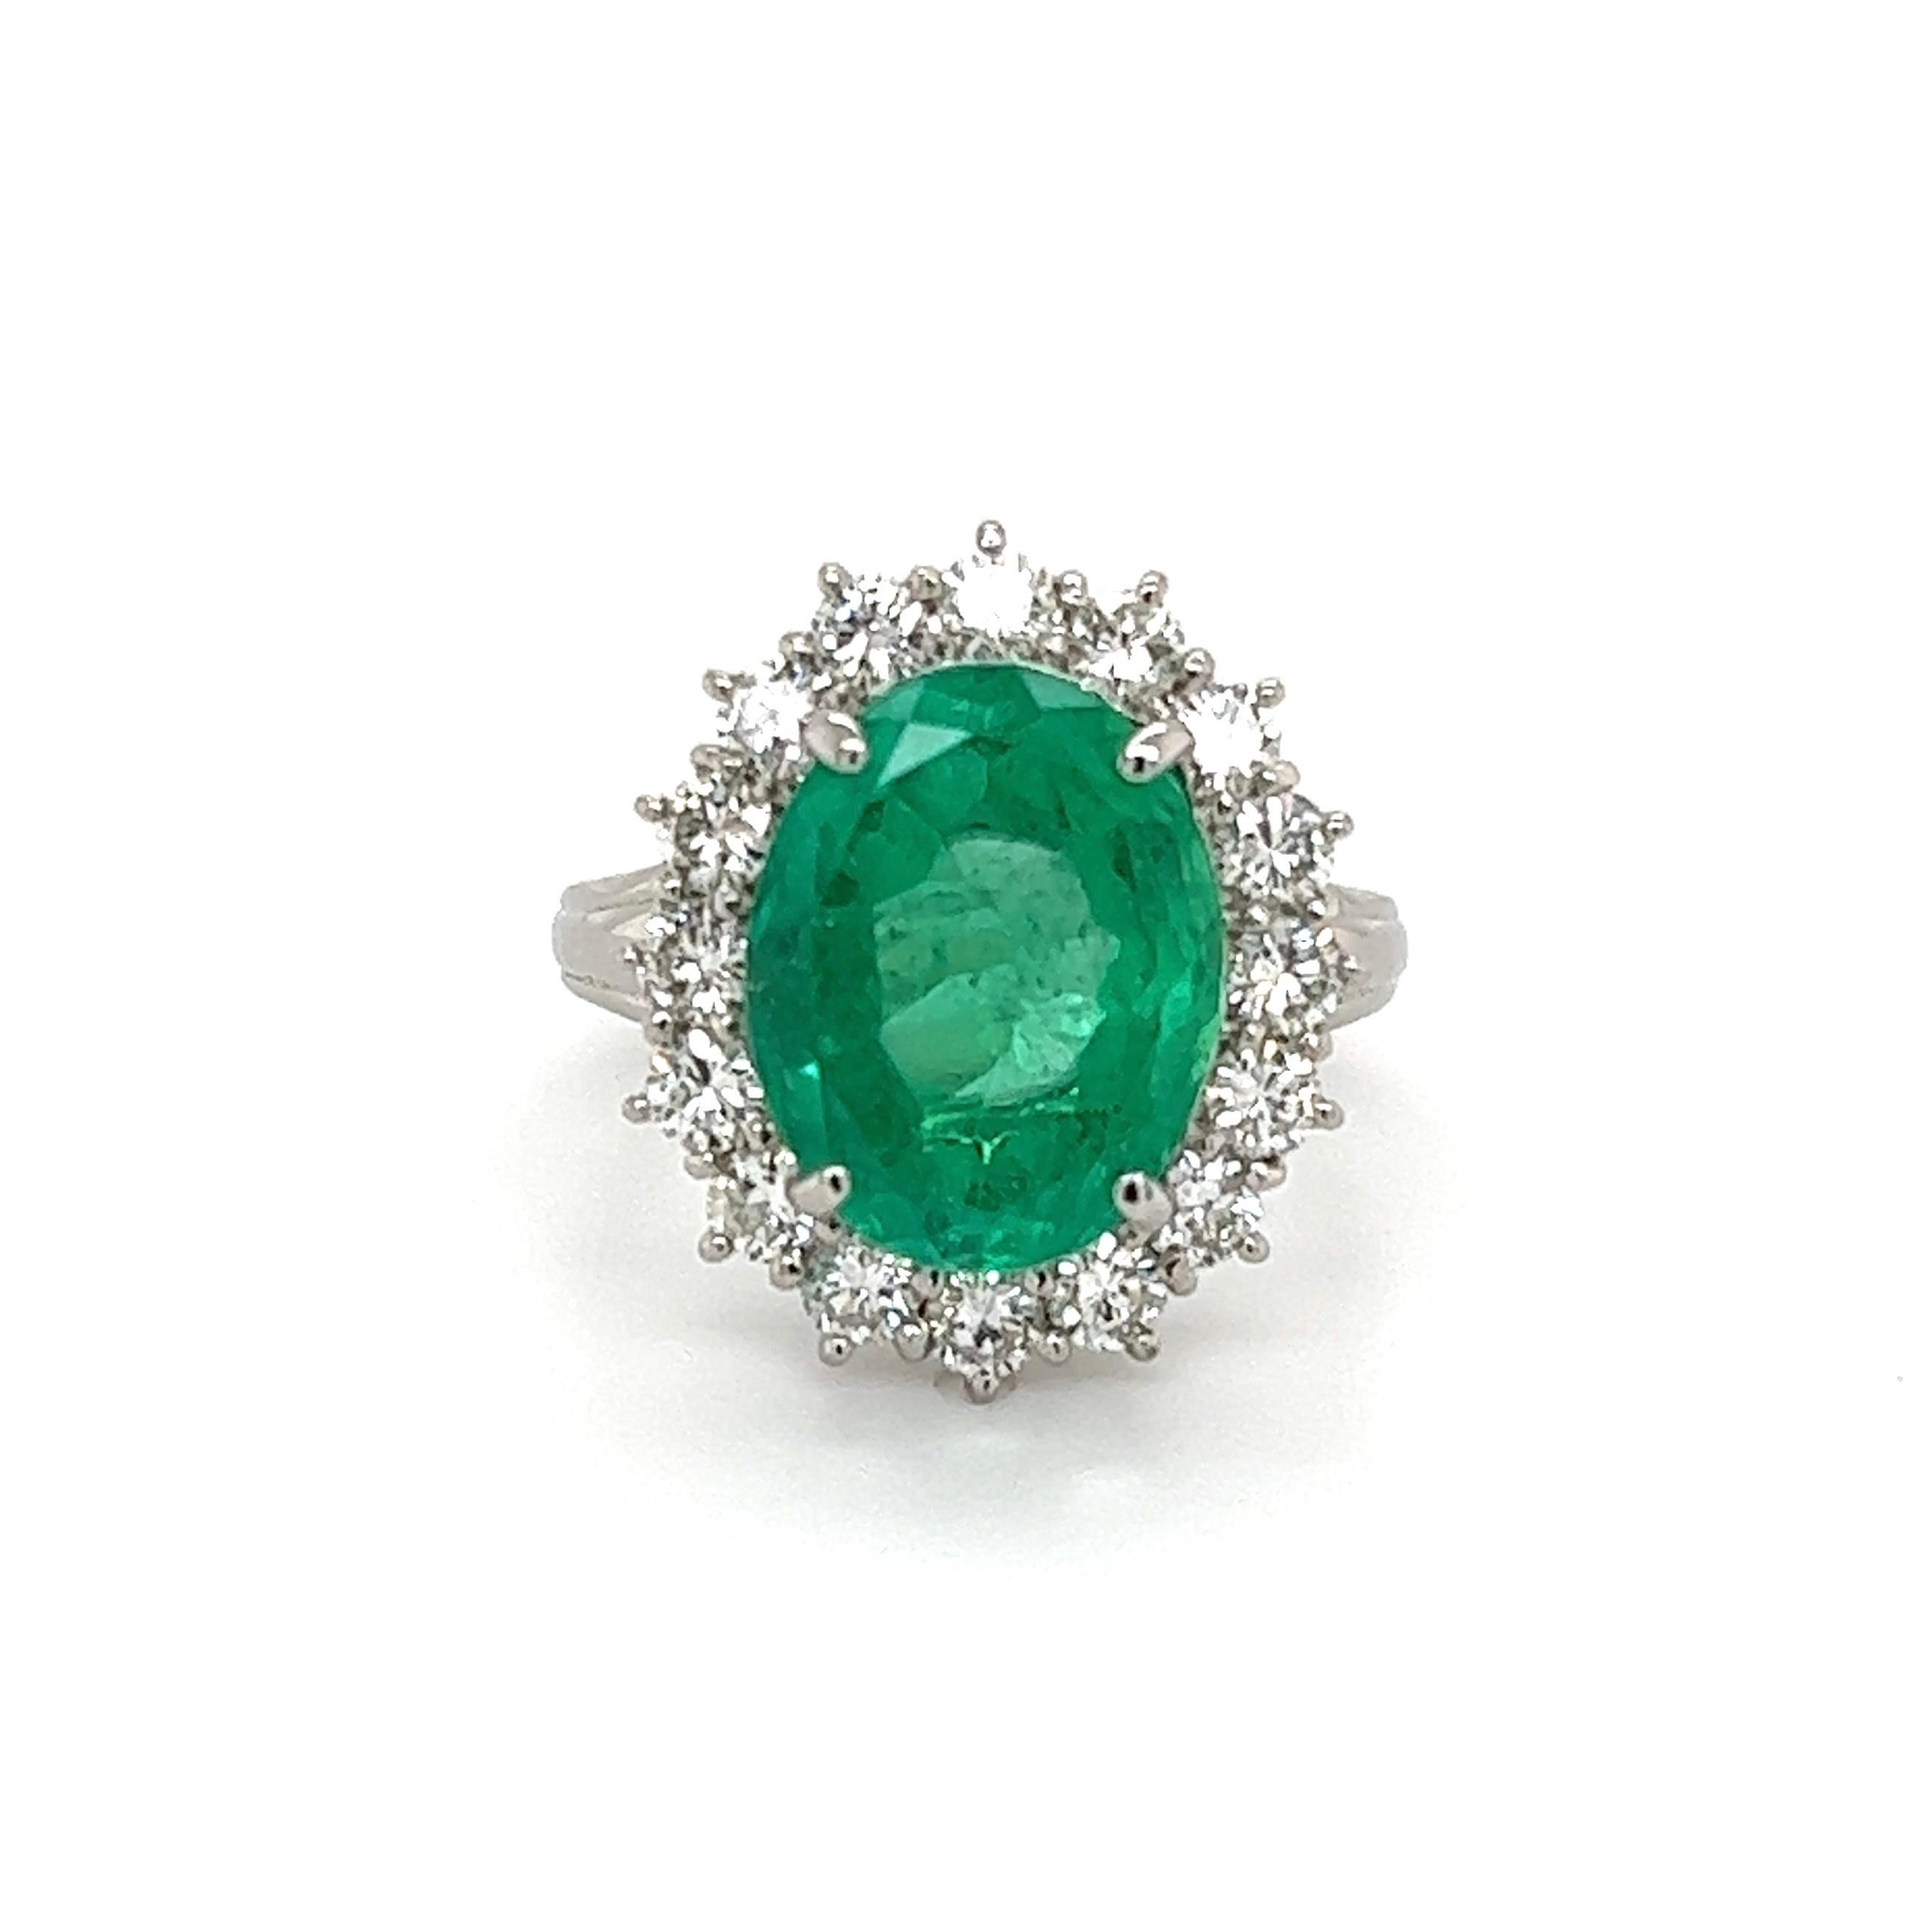 Mixed Cut 7.09 Carat Emerald GIA and Diamond Platinum Cocktail Ring Estate Fine Jewelry For Sale